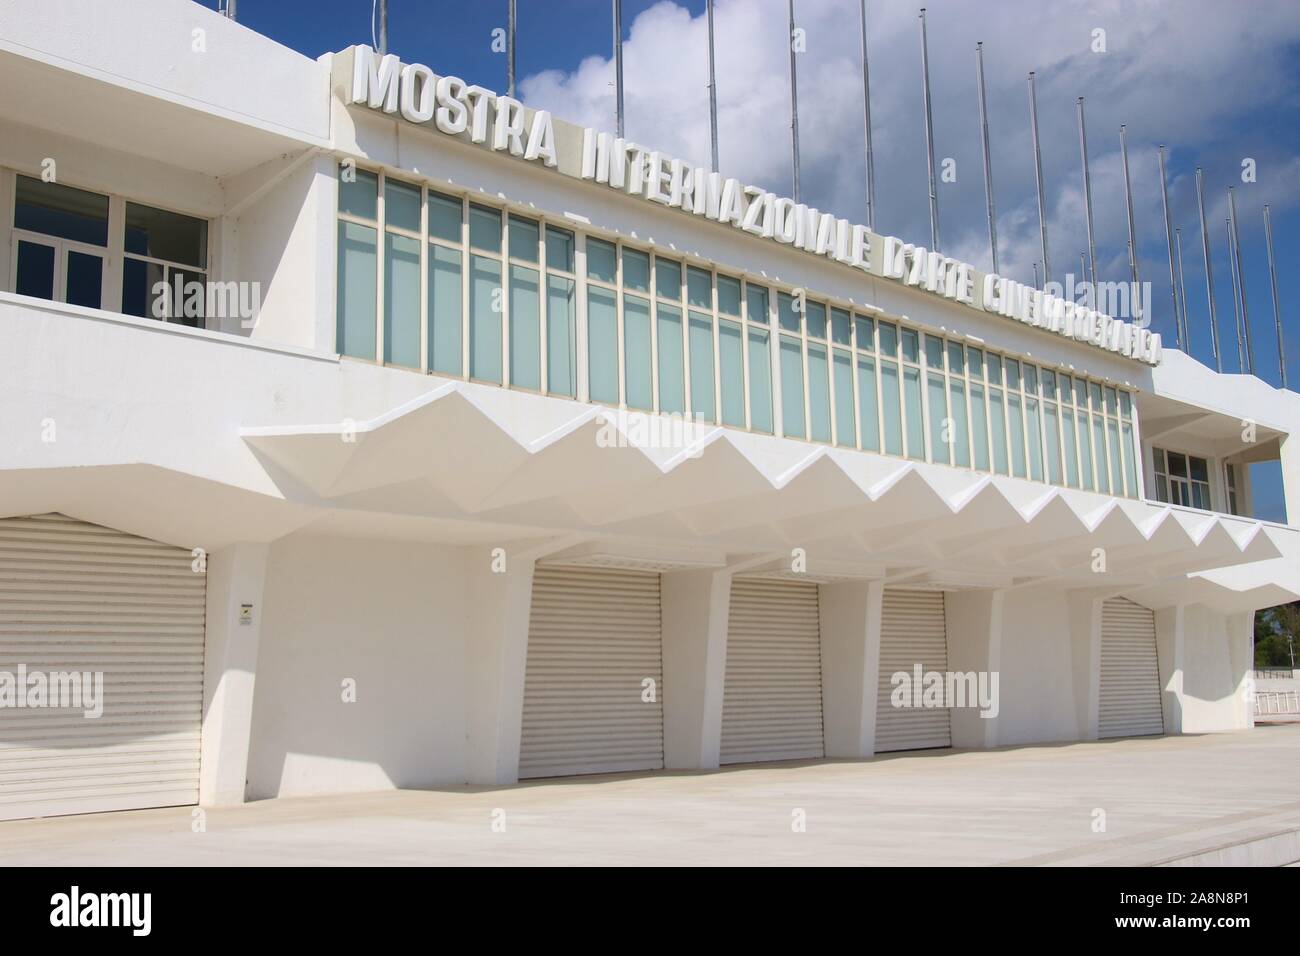 The new cinema Palace on the Island Lido di Venezia, Venice. Located  on Lungomare Marconi. It opened in 2019. Italy, South Europe. Stock Photo